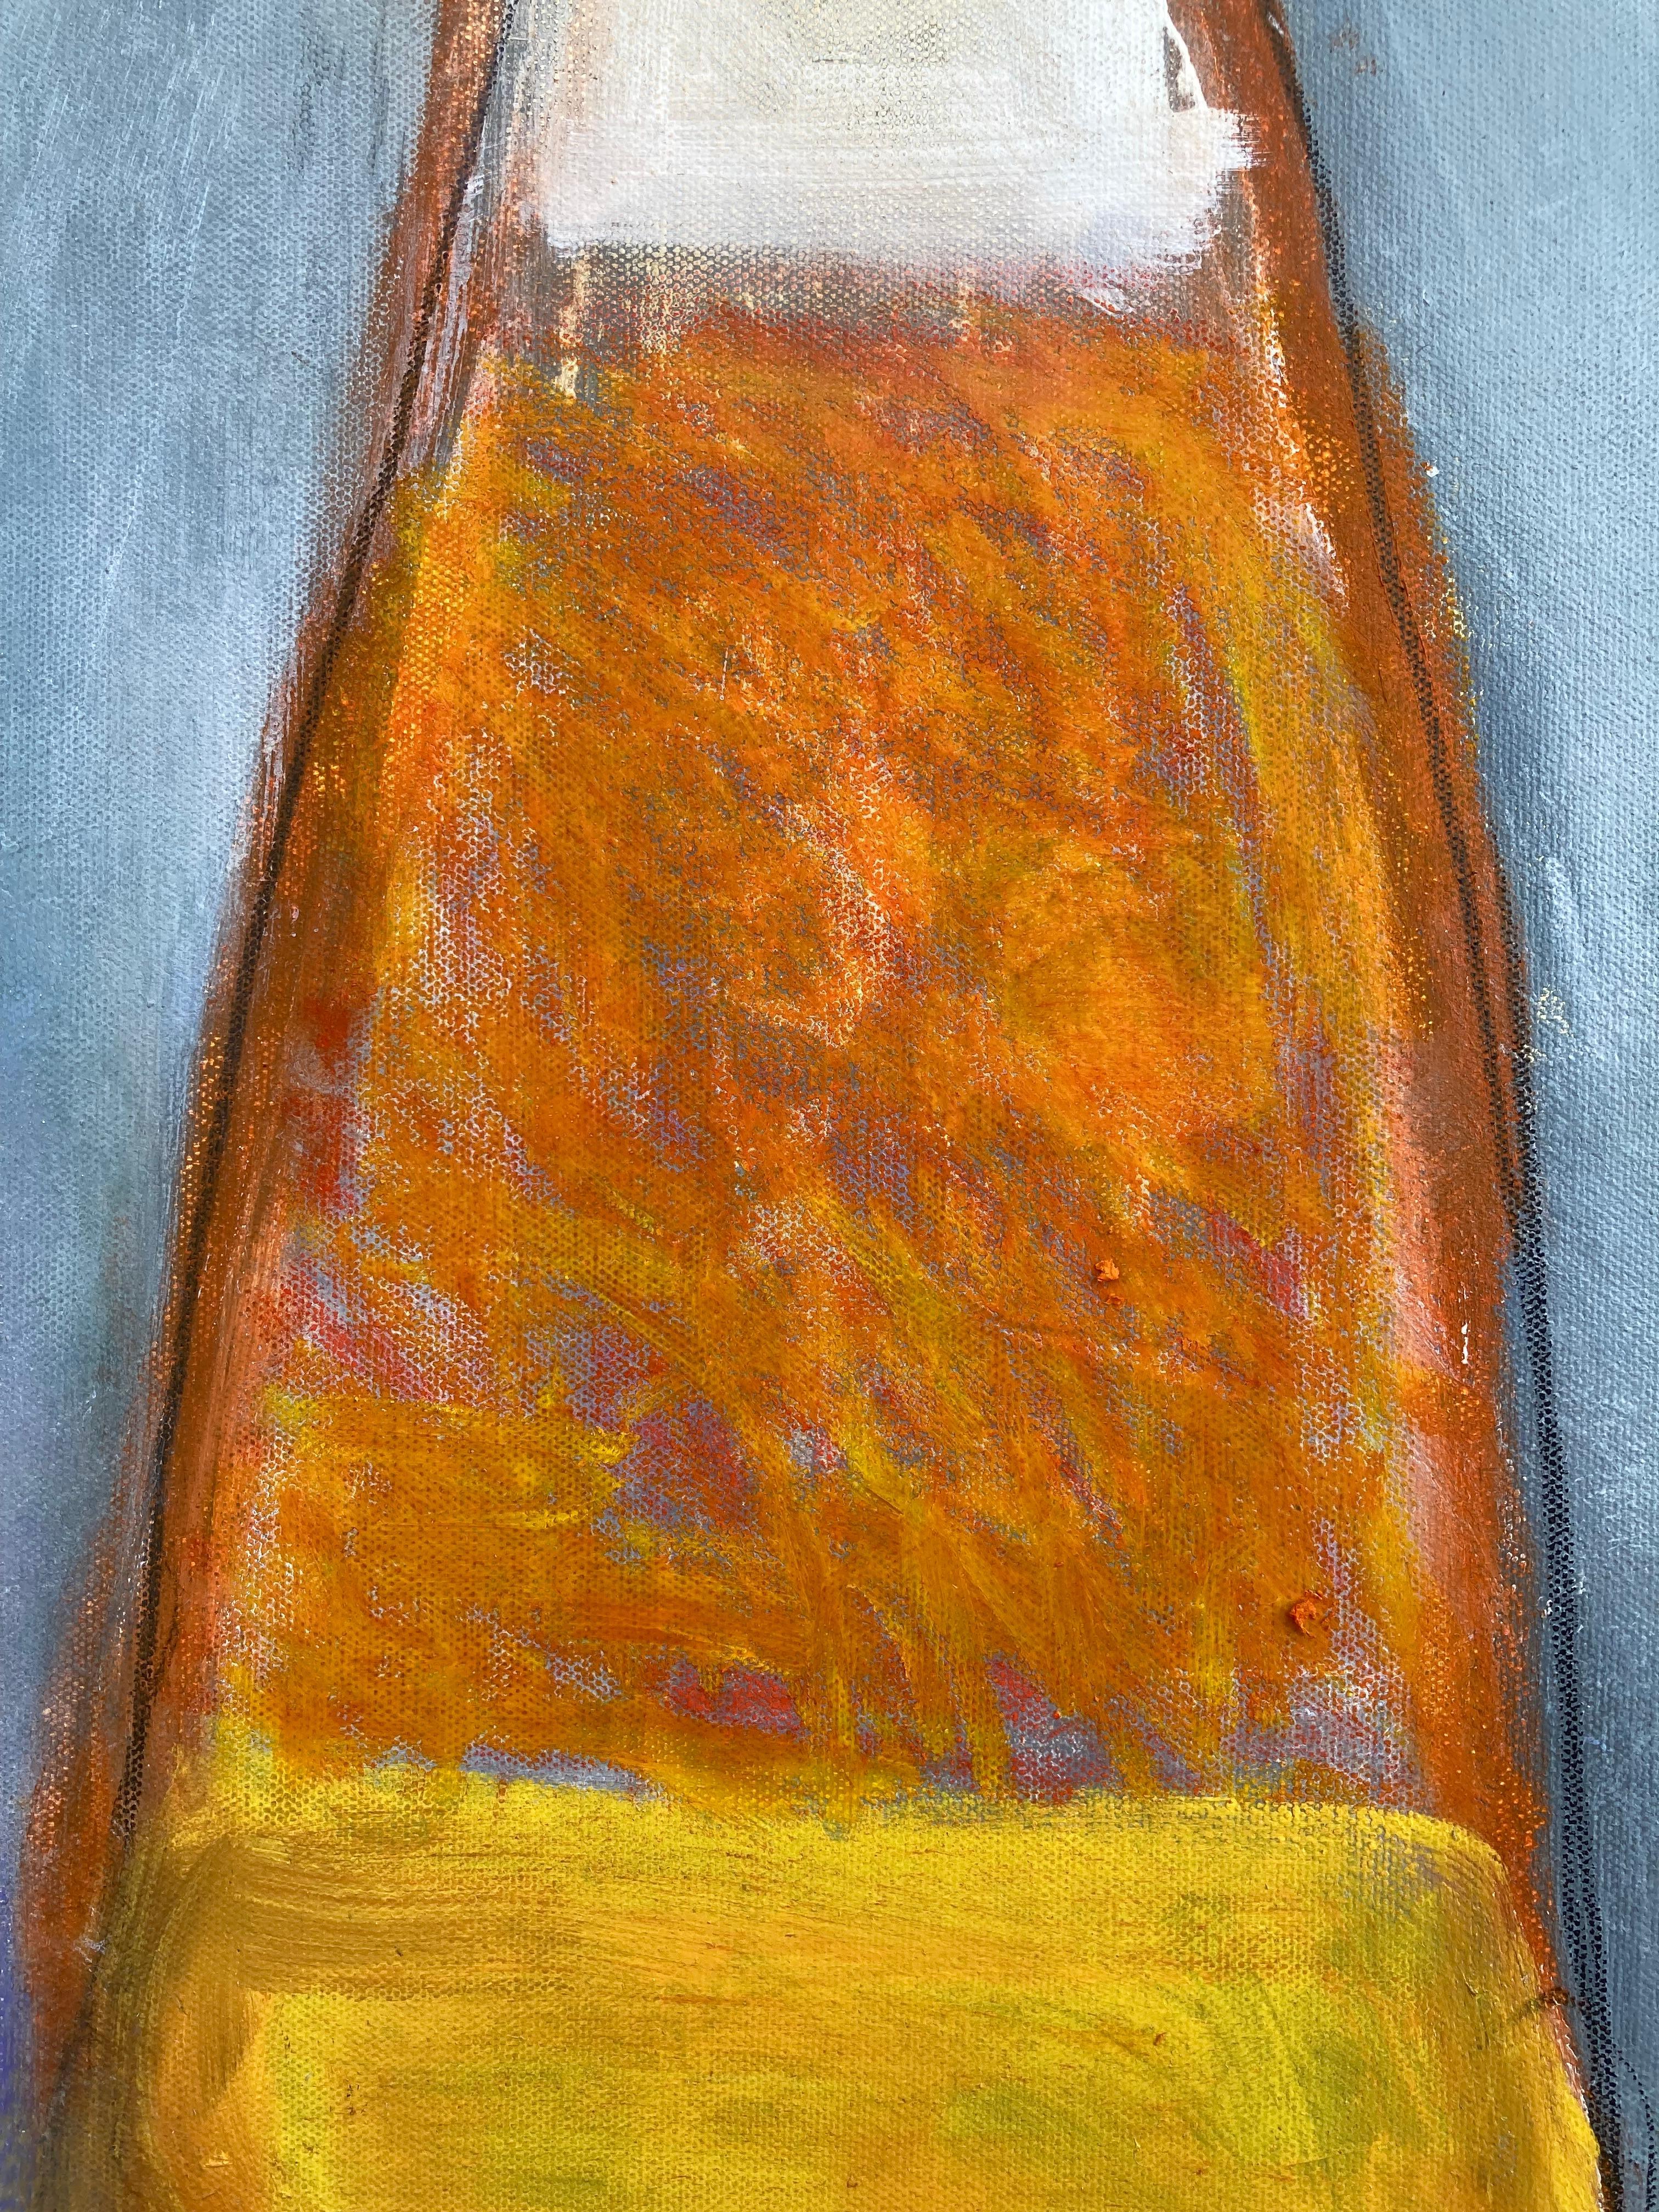 The Philosopher Classifies Candy Corn (Large) - Abstract Painting by Guy Lyman